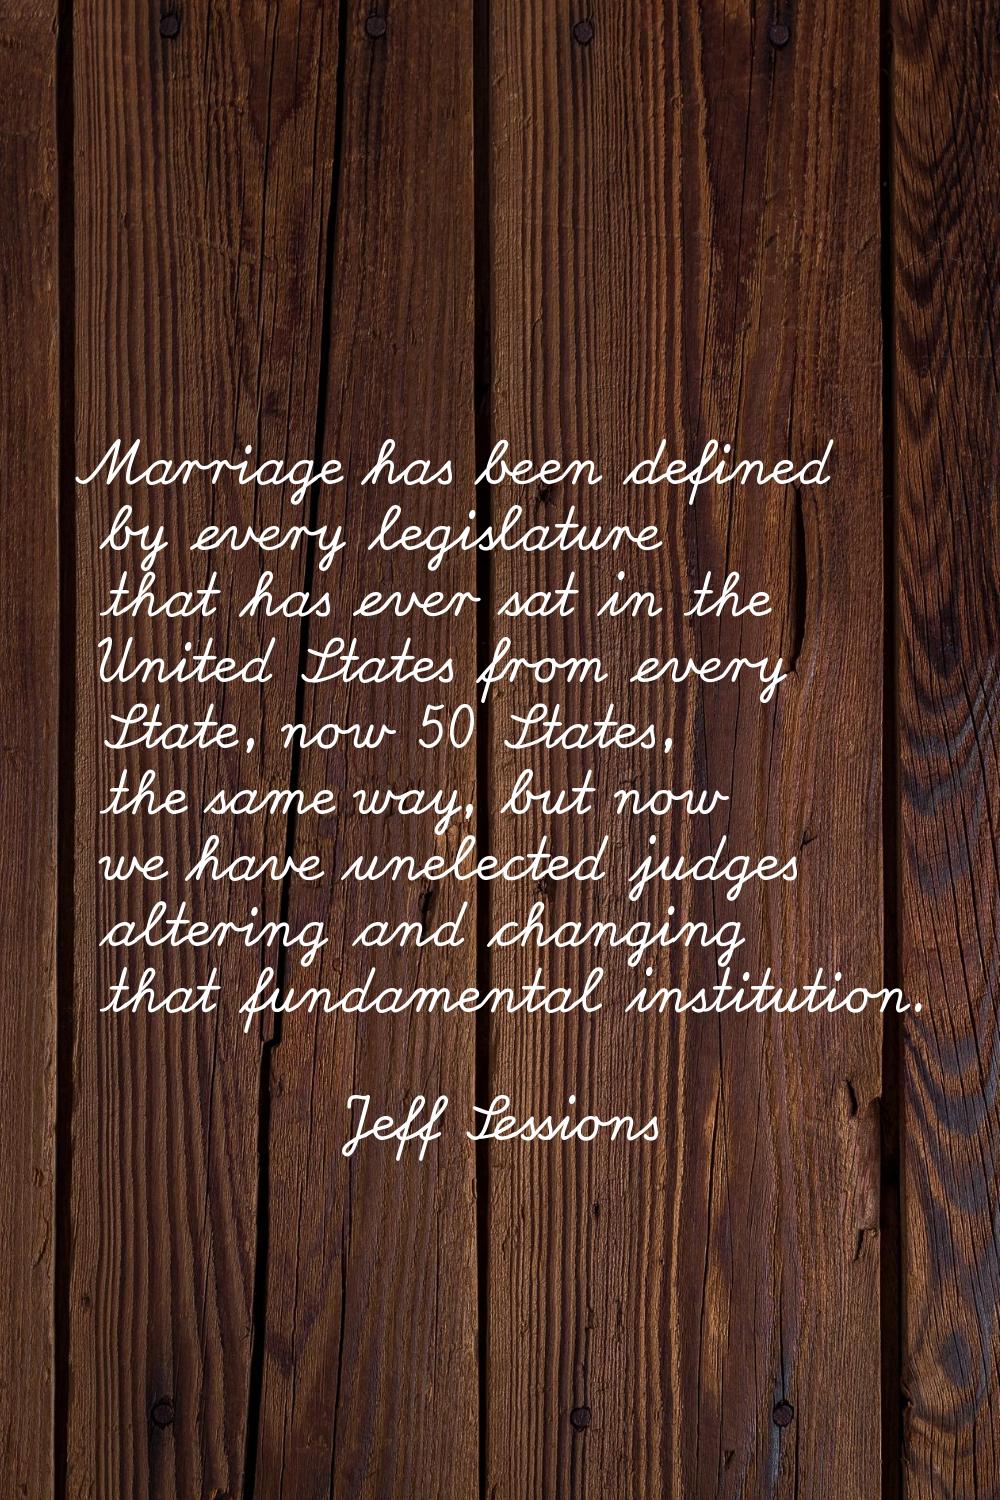 Marriage has been defined by every legislature that has ever sat in the United States from every St